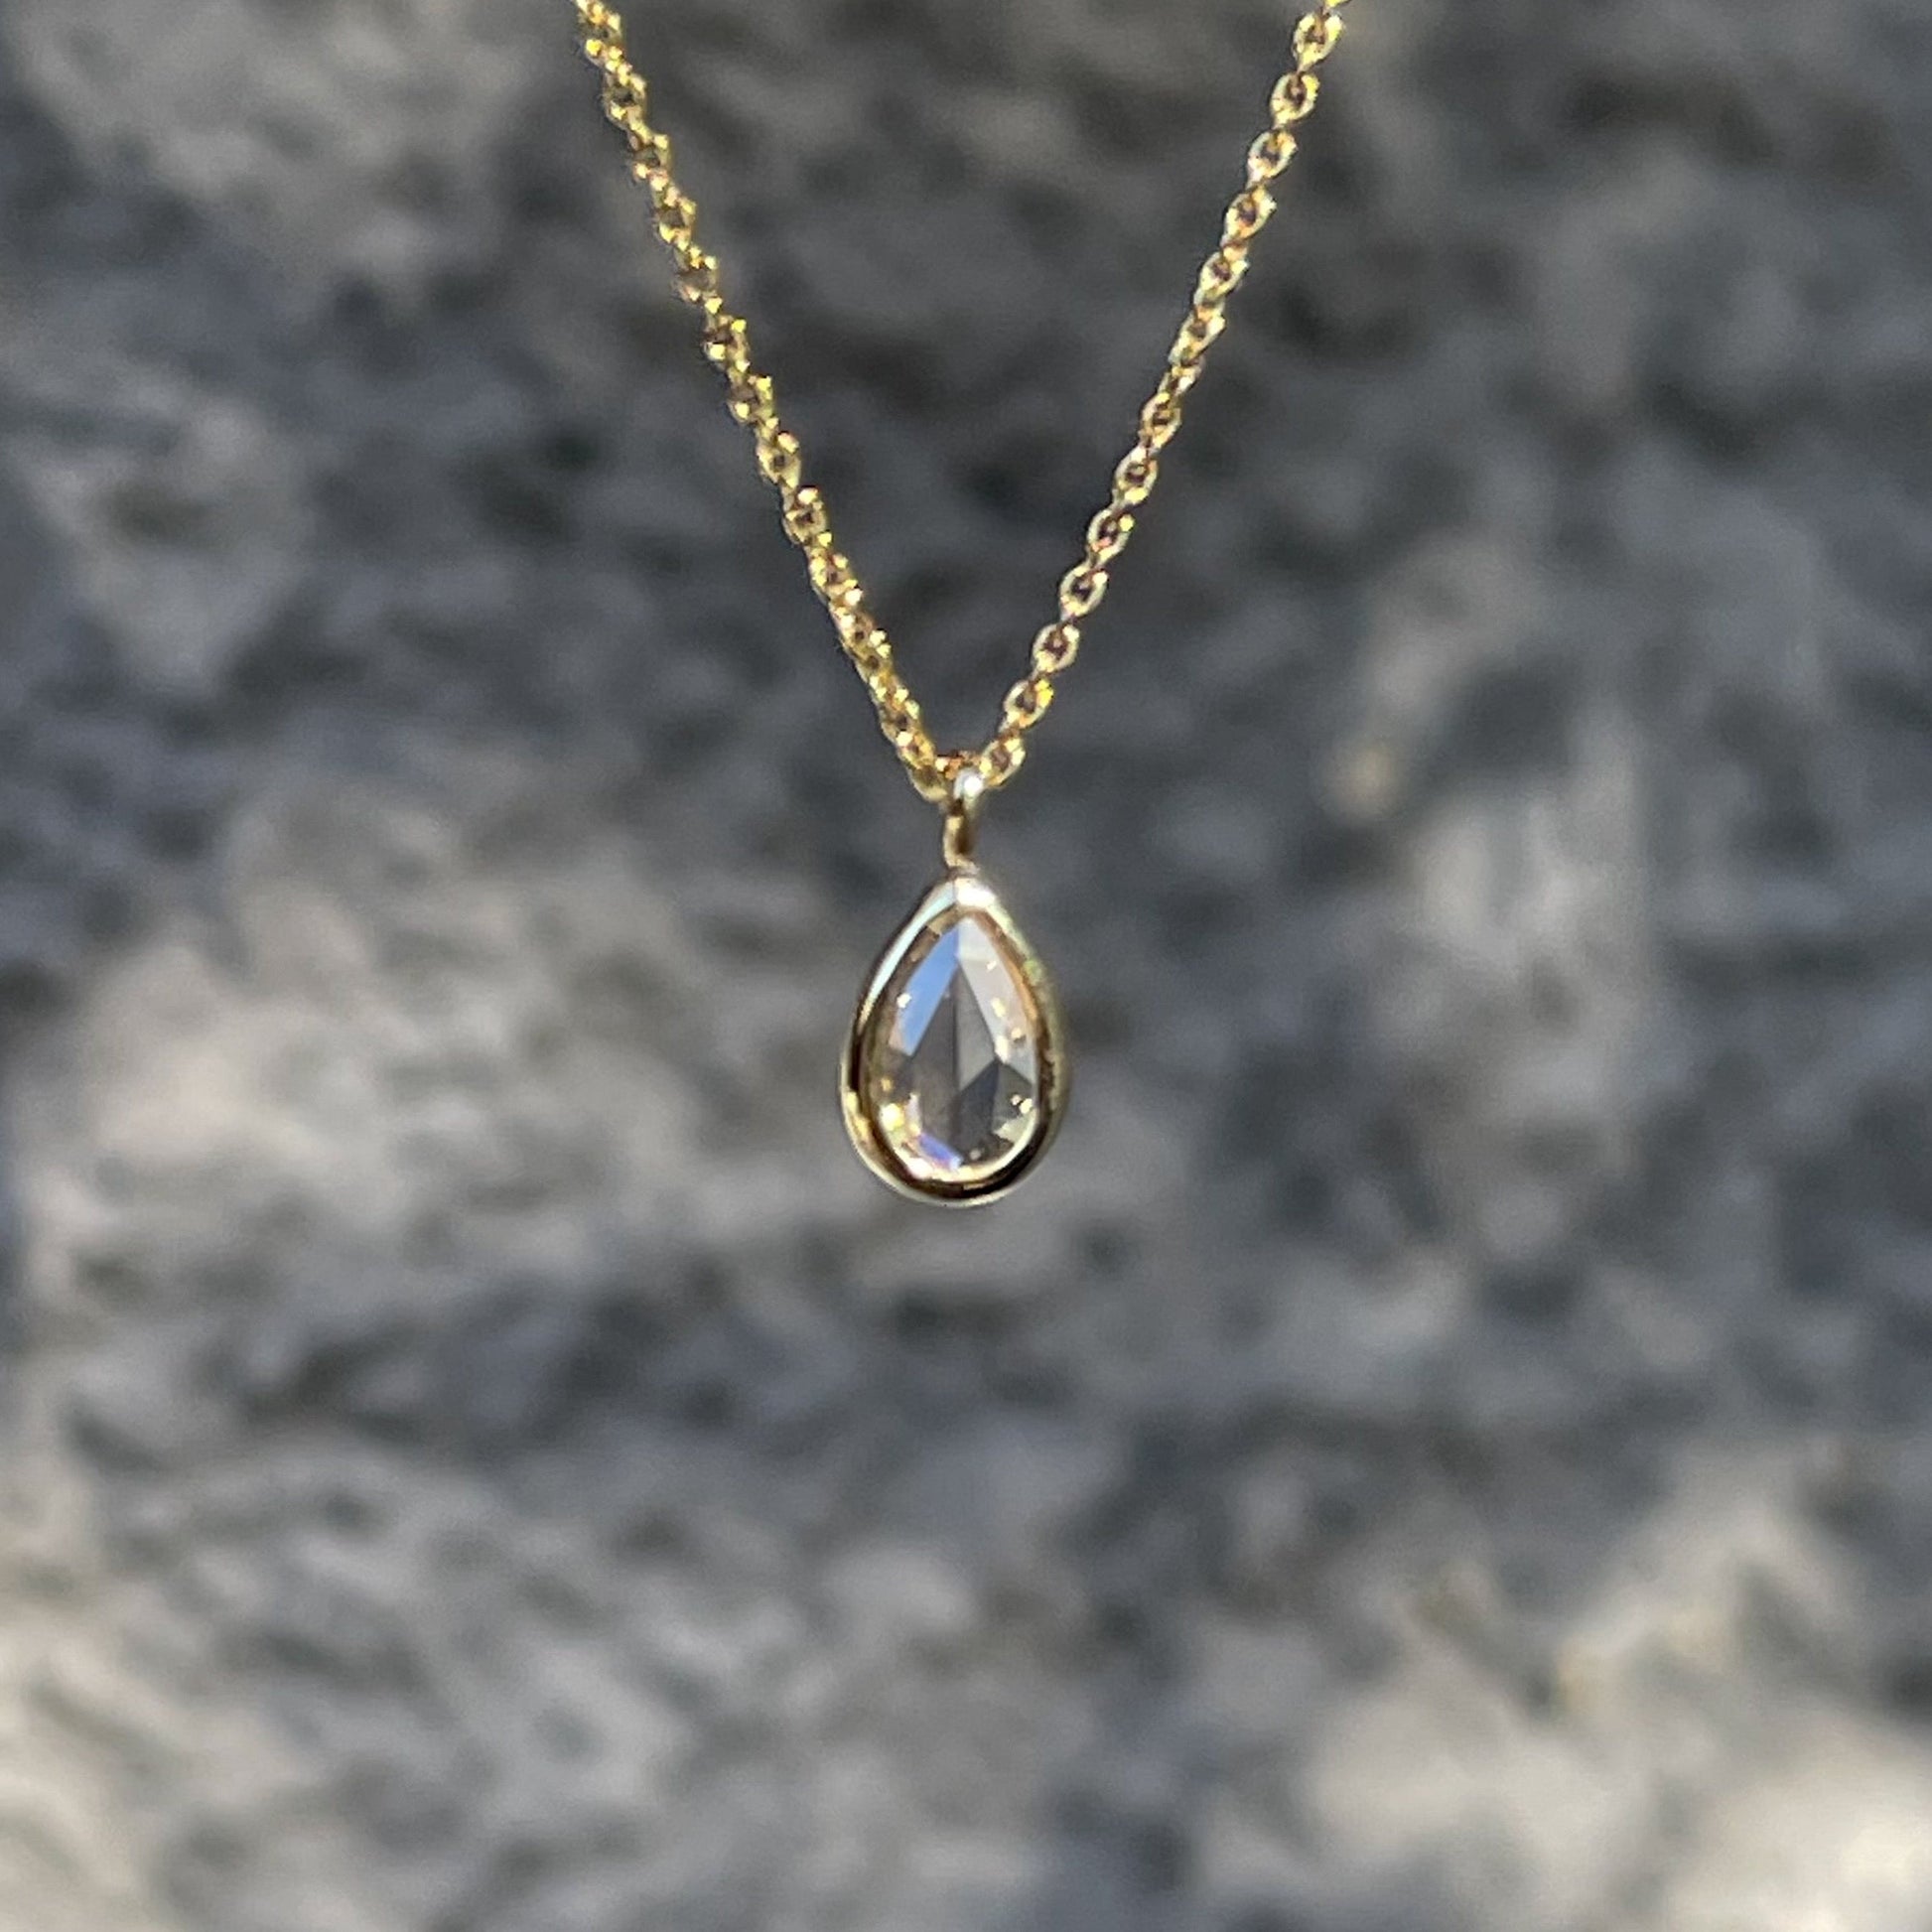 A Dainty Diamond Necklace by NIXIN Jewelry with a pear shaped diamond in yellow gold.